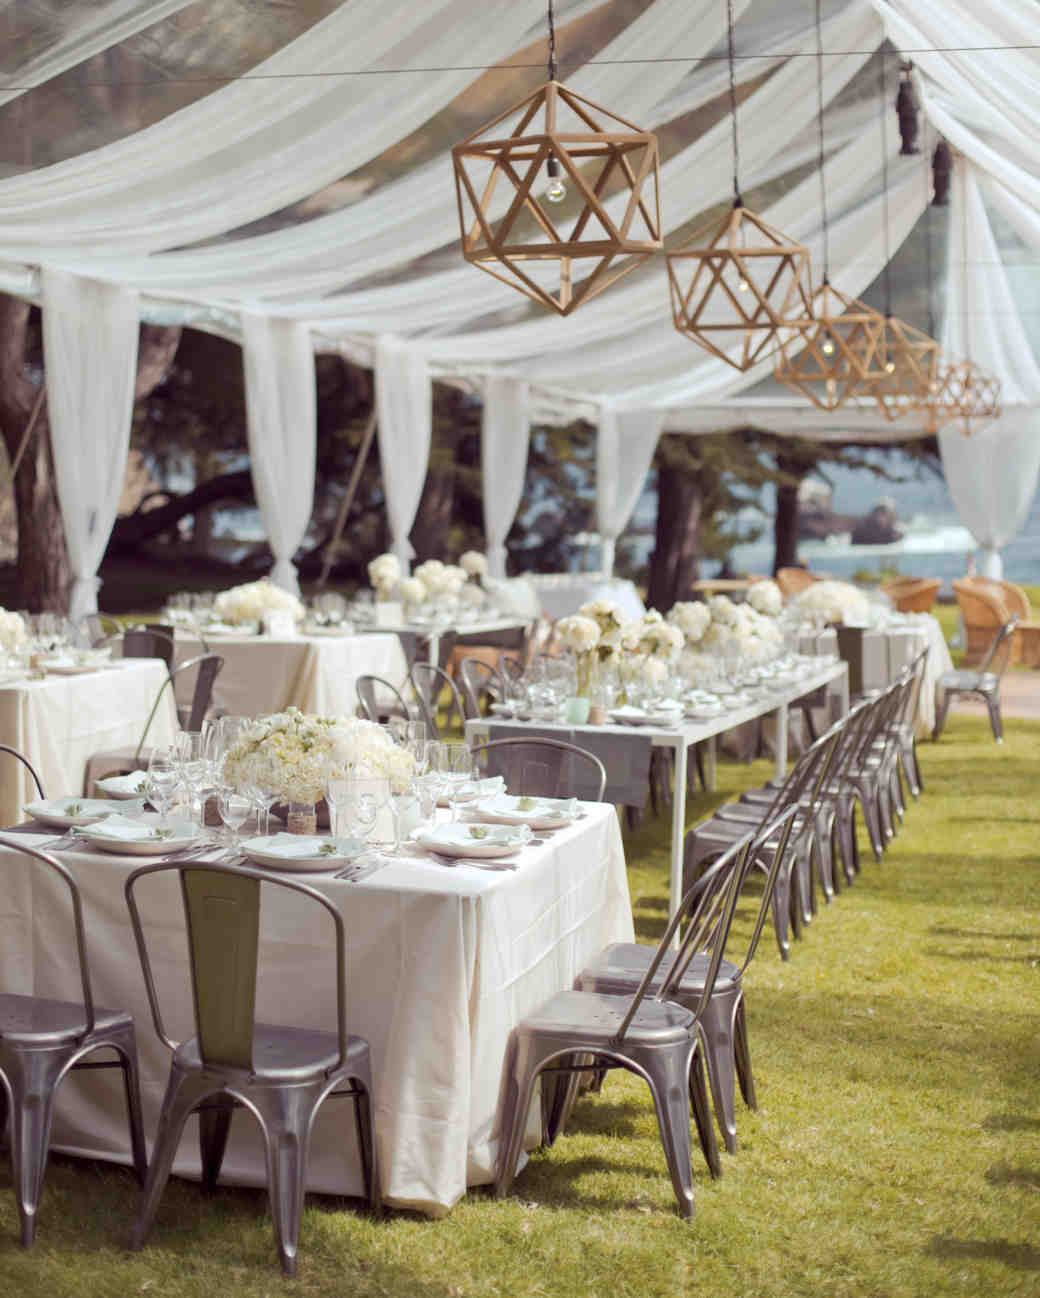 Decorating For Wedding Reception
 33 Tent Decorating Ideas to Upgrade Your Wedding Reception